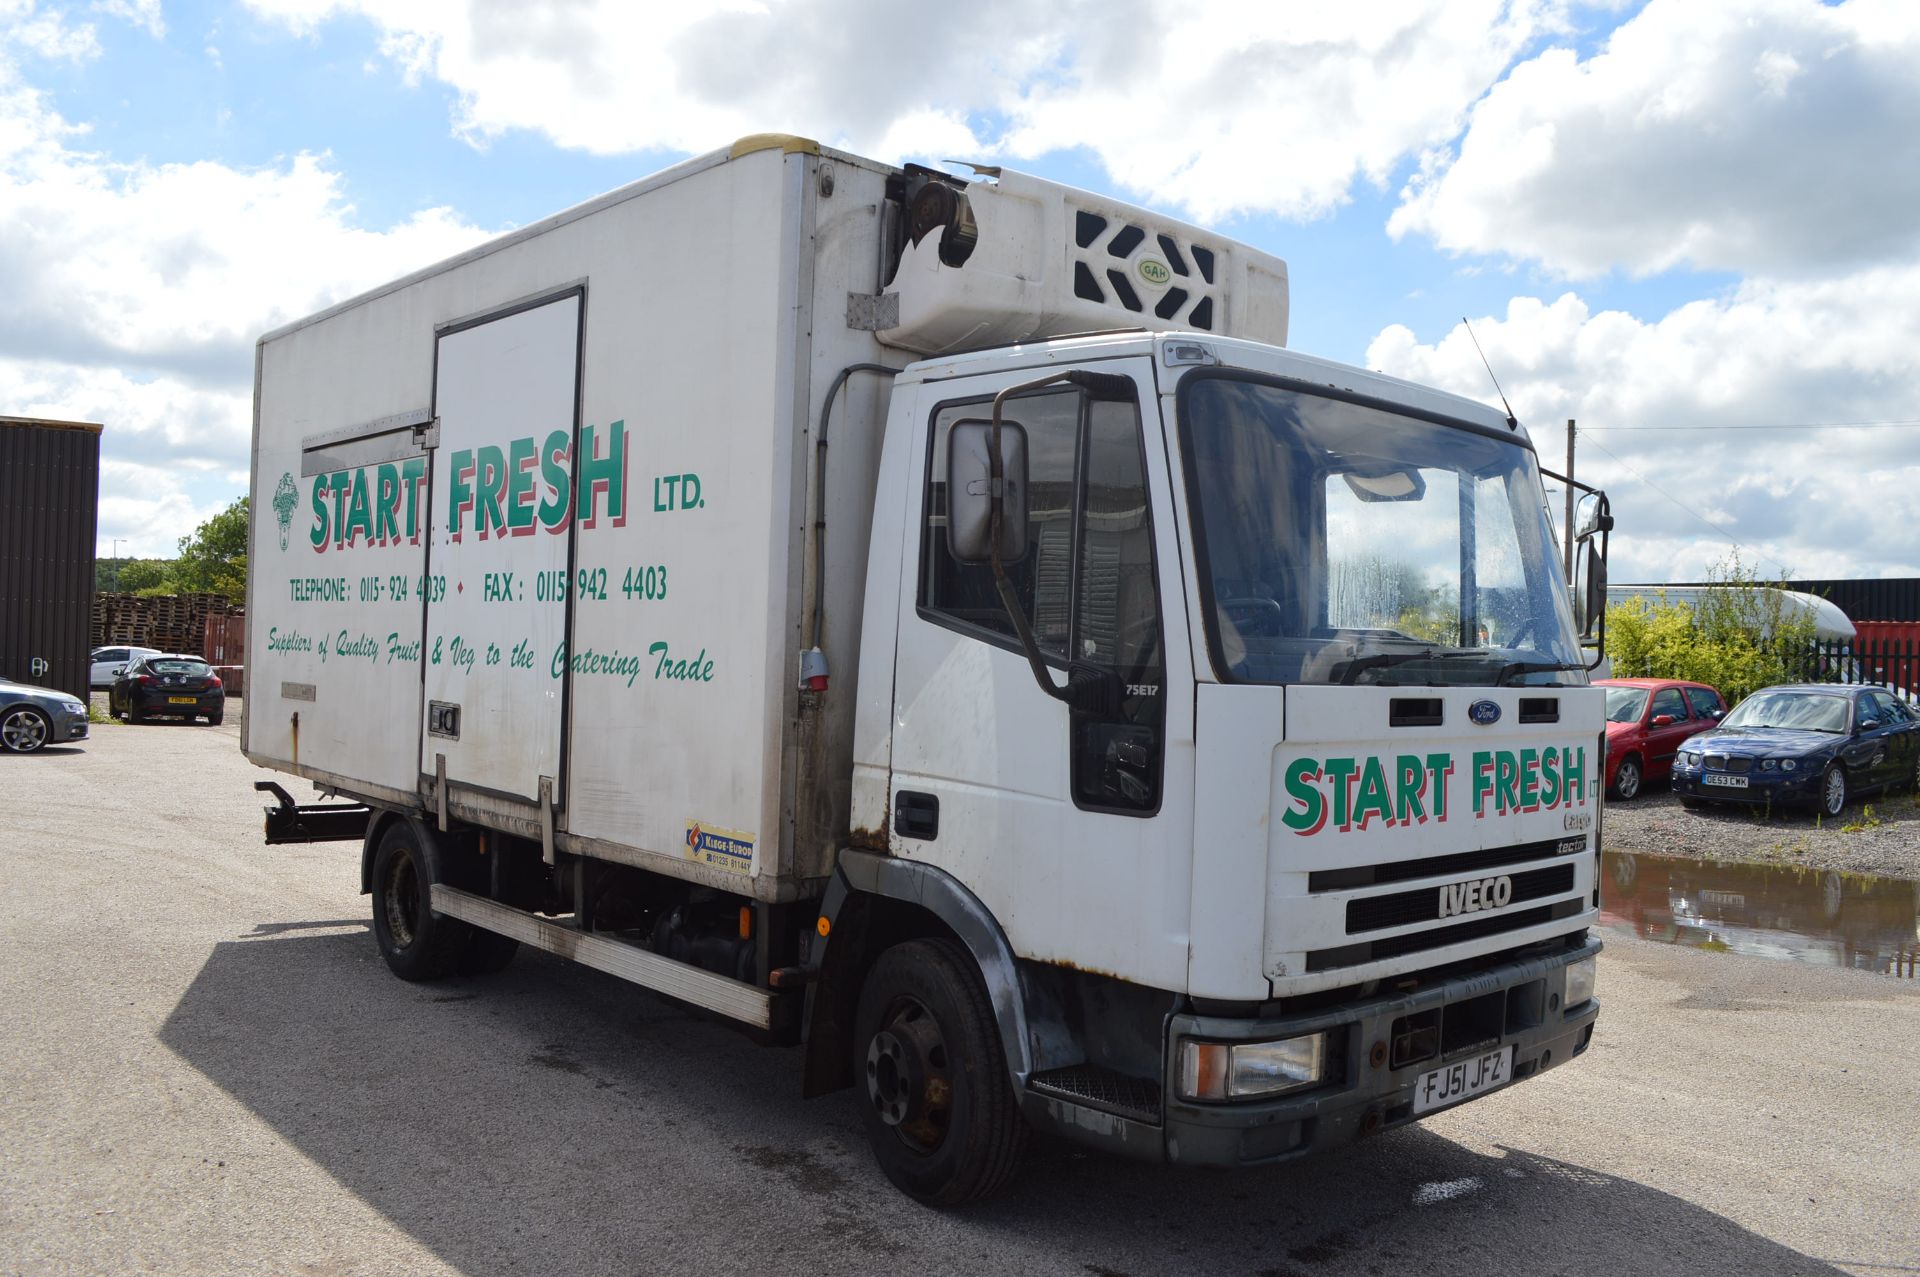 2001/51 REG IVECO-FORD CARGO TECTOR 75E17 REFRIGERATED LORRY